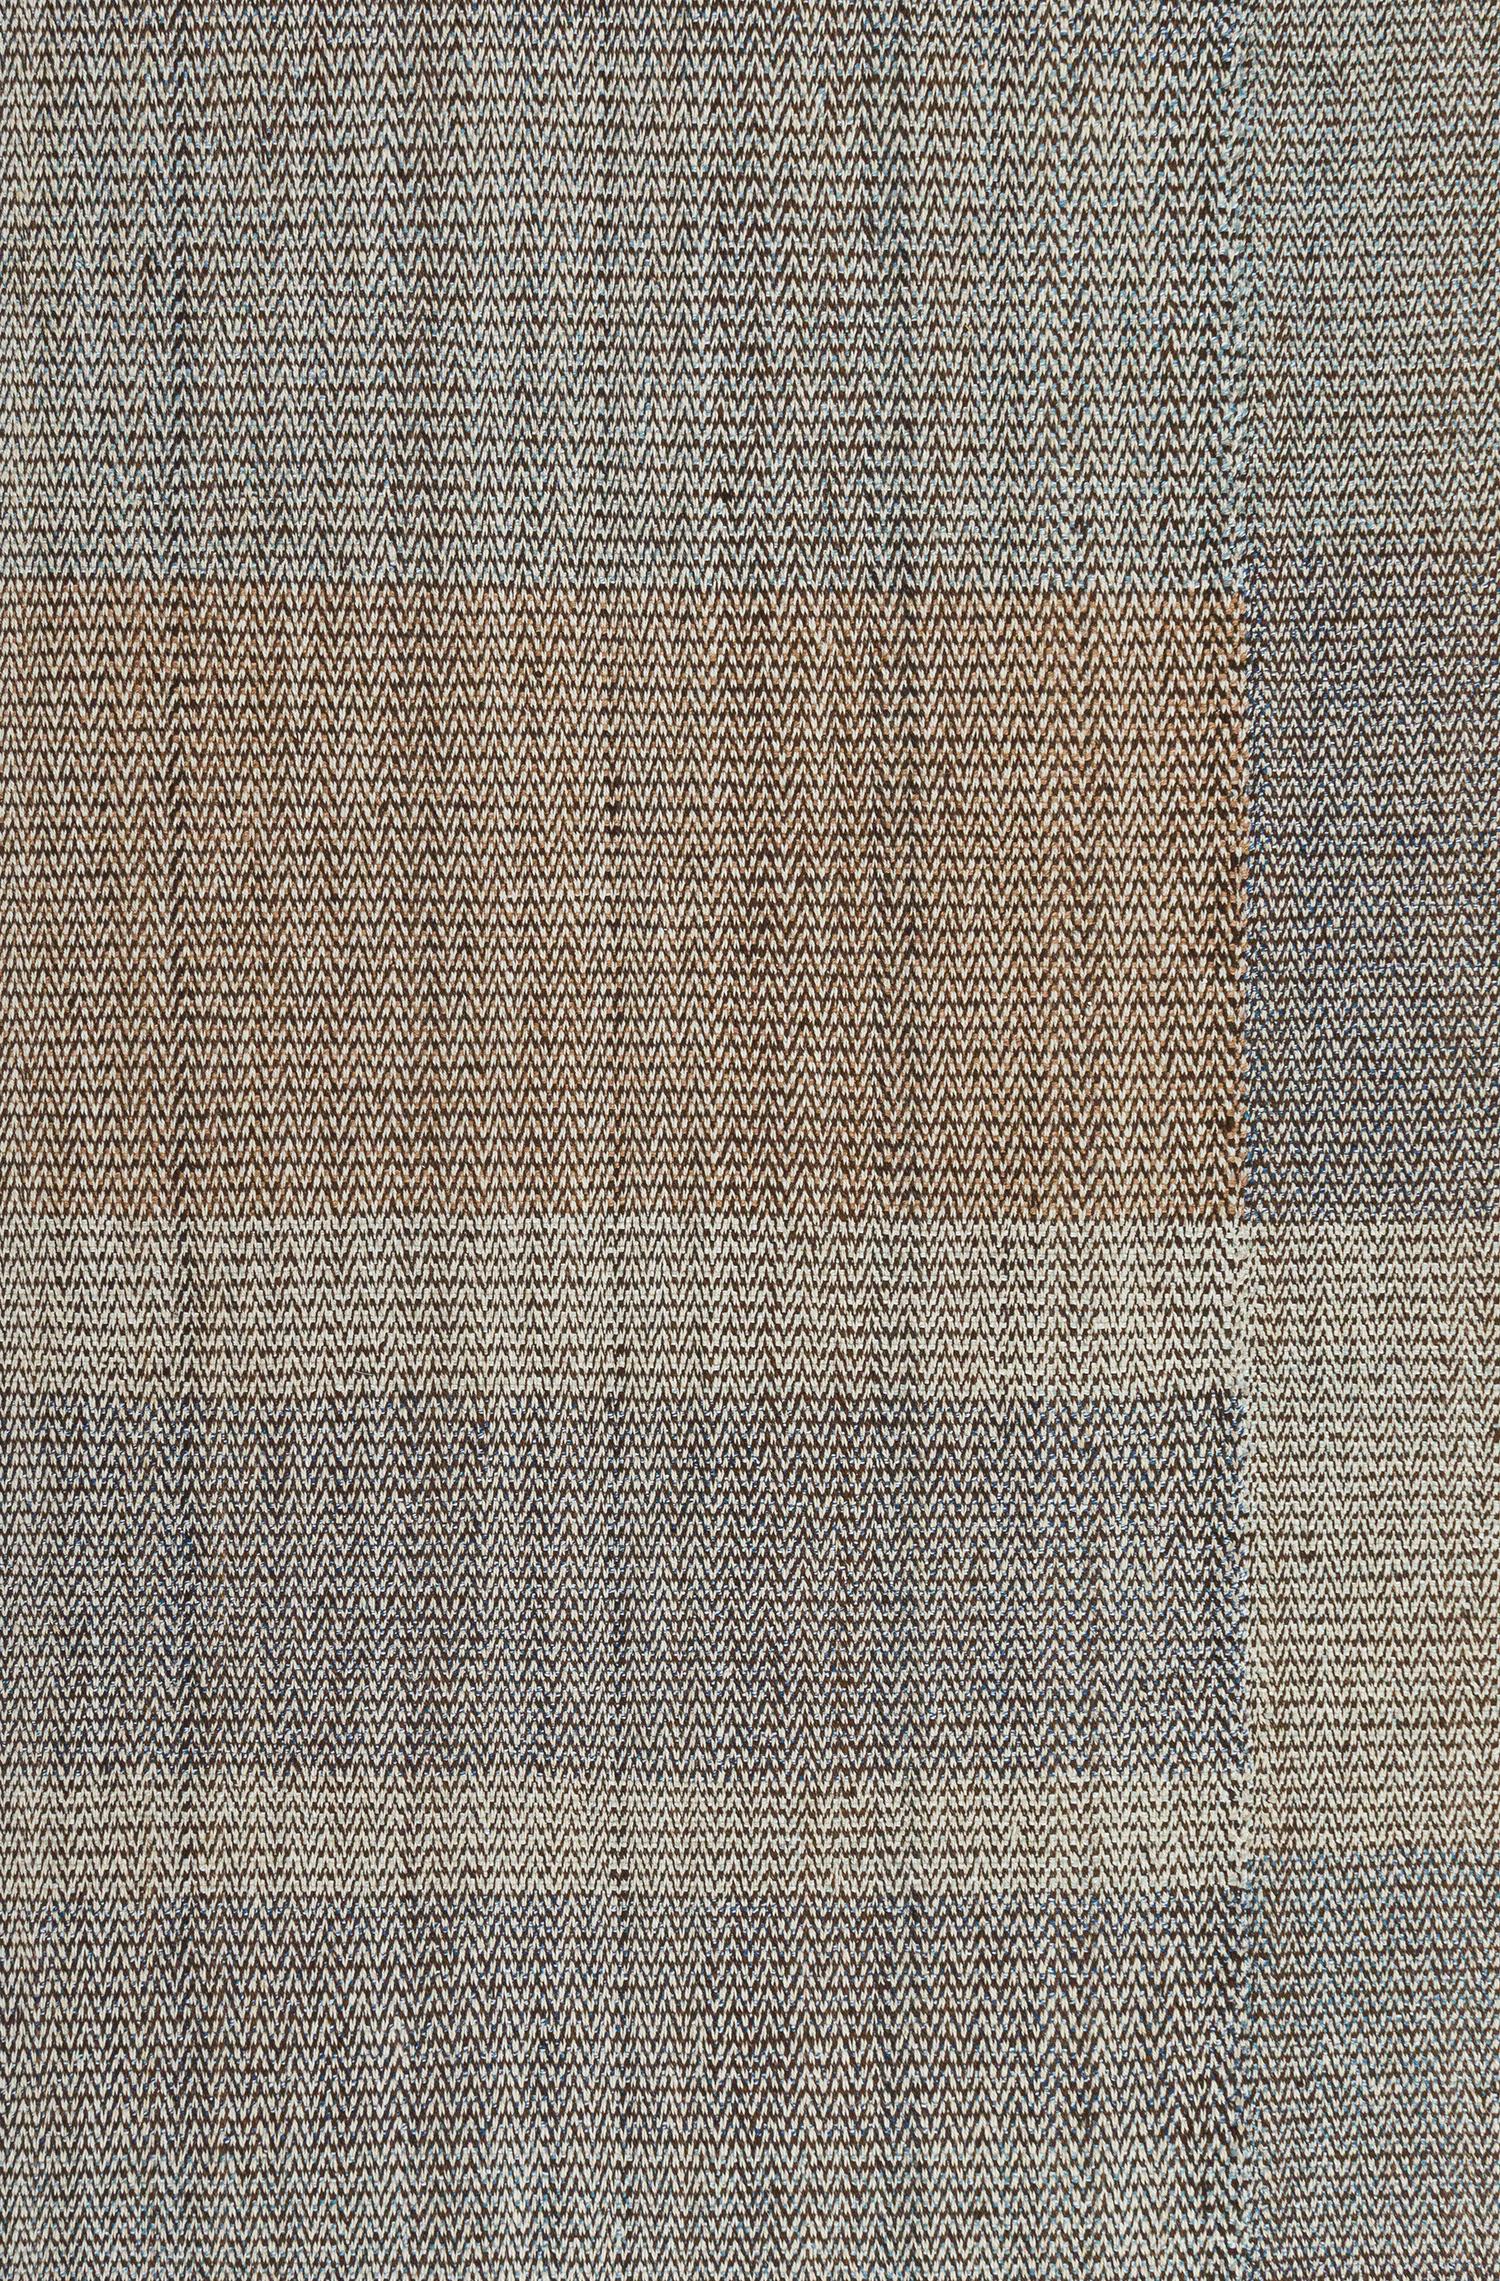 This Charmo flatweave rug is made with handspun wool and natural dyes.  It is inspired by the antique kilims that are native to Northwest of Iran.  NASIRI continues their rich tradition of rug making by applying the same techniques and methods as